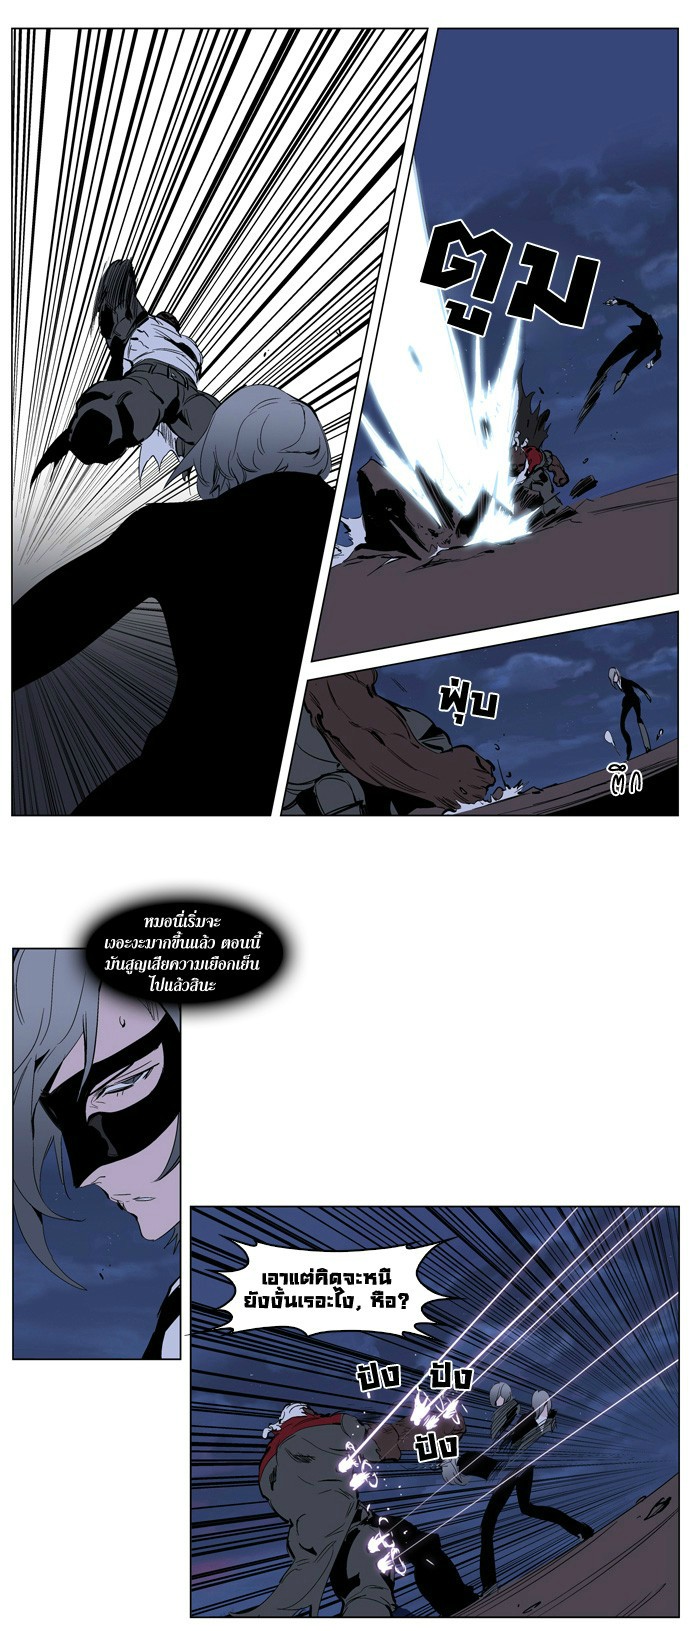 Noblesse 224 012